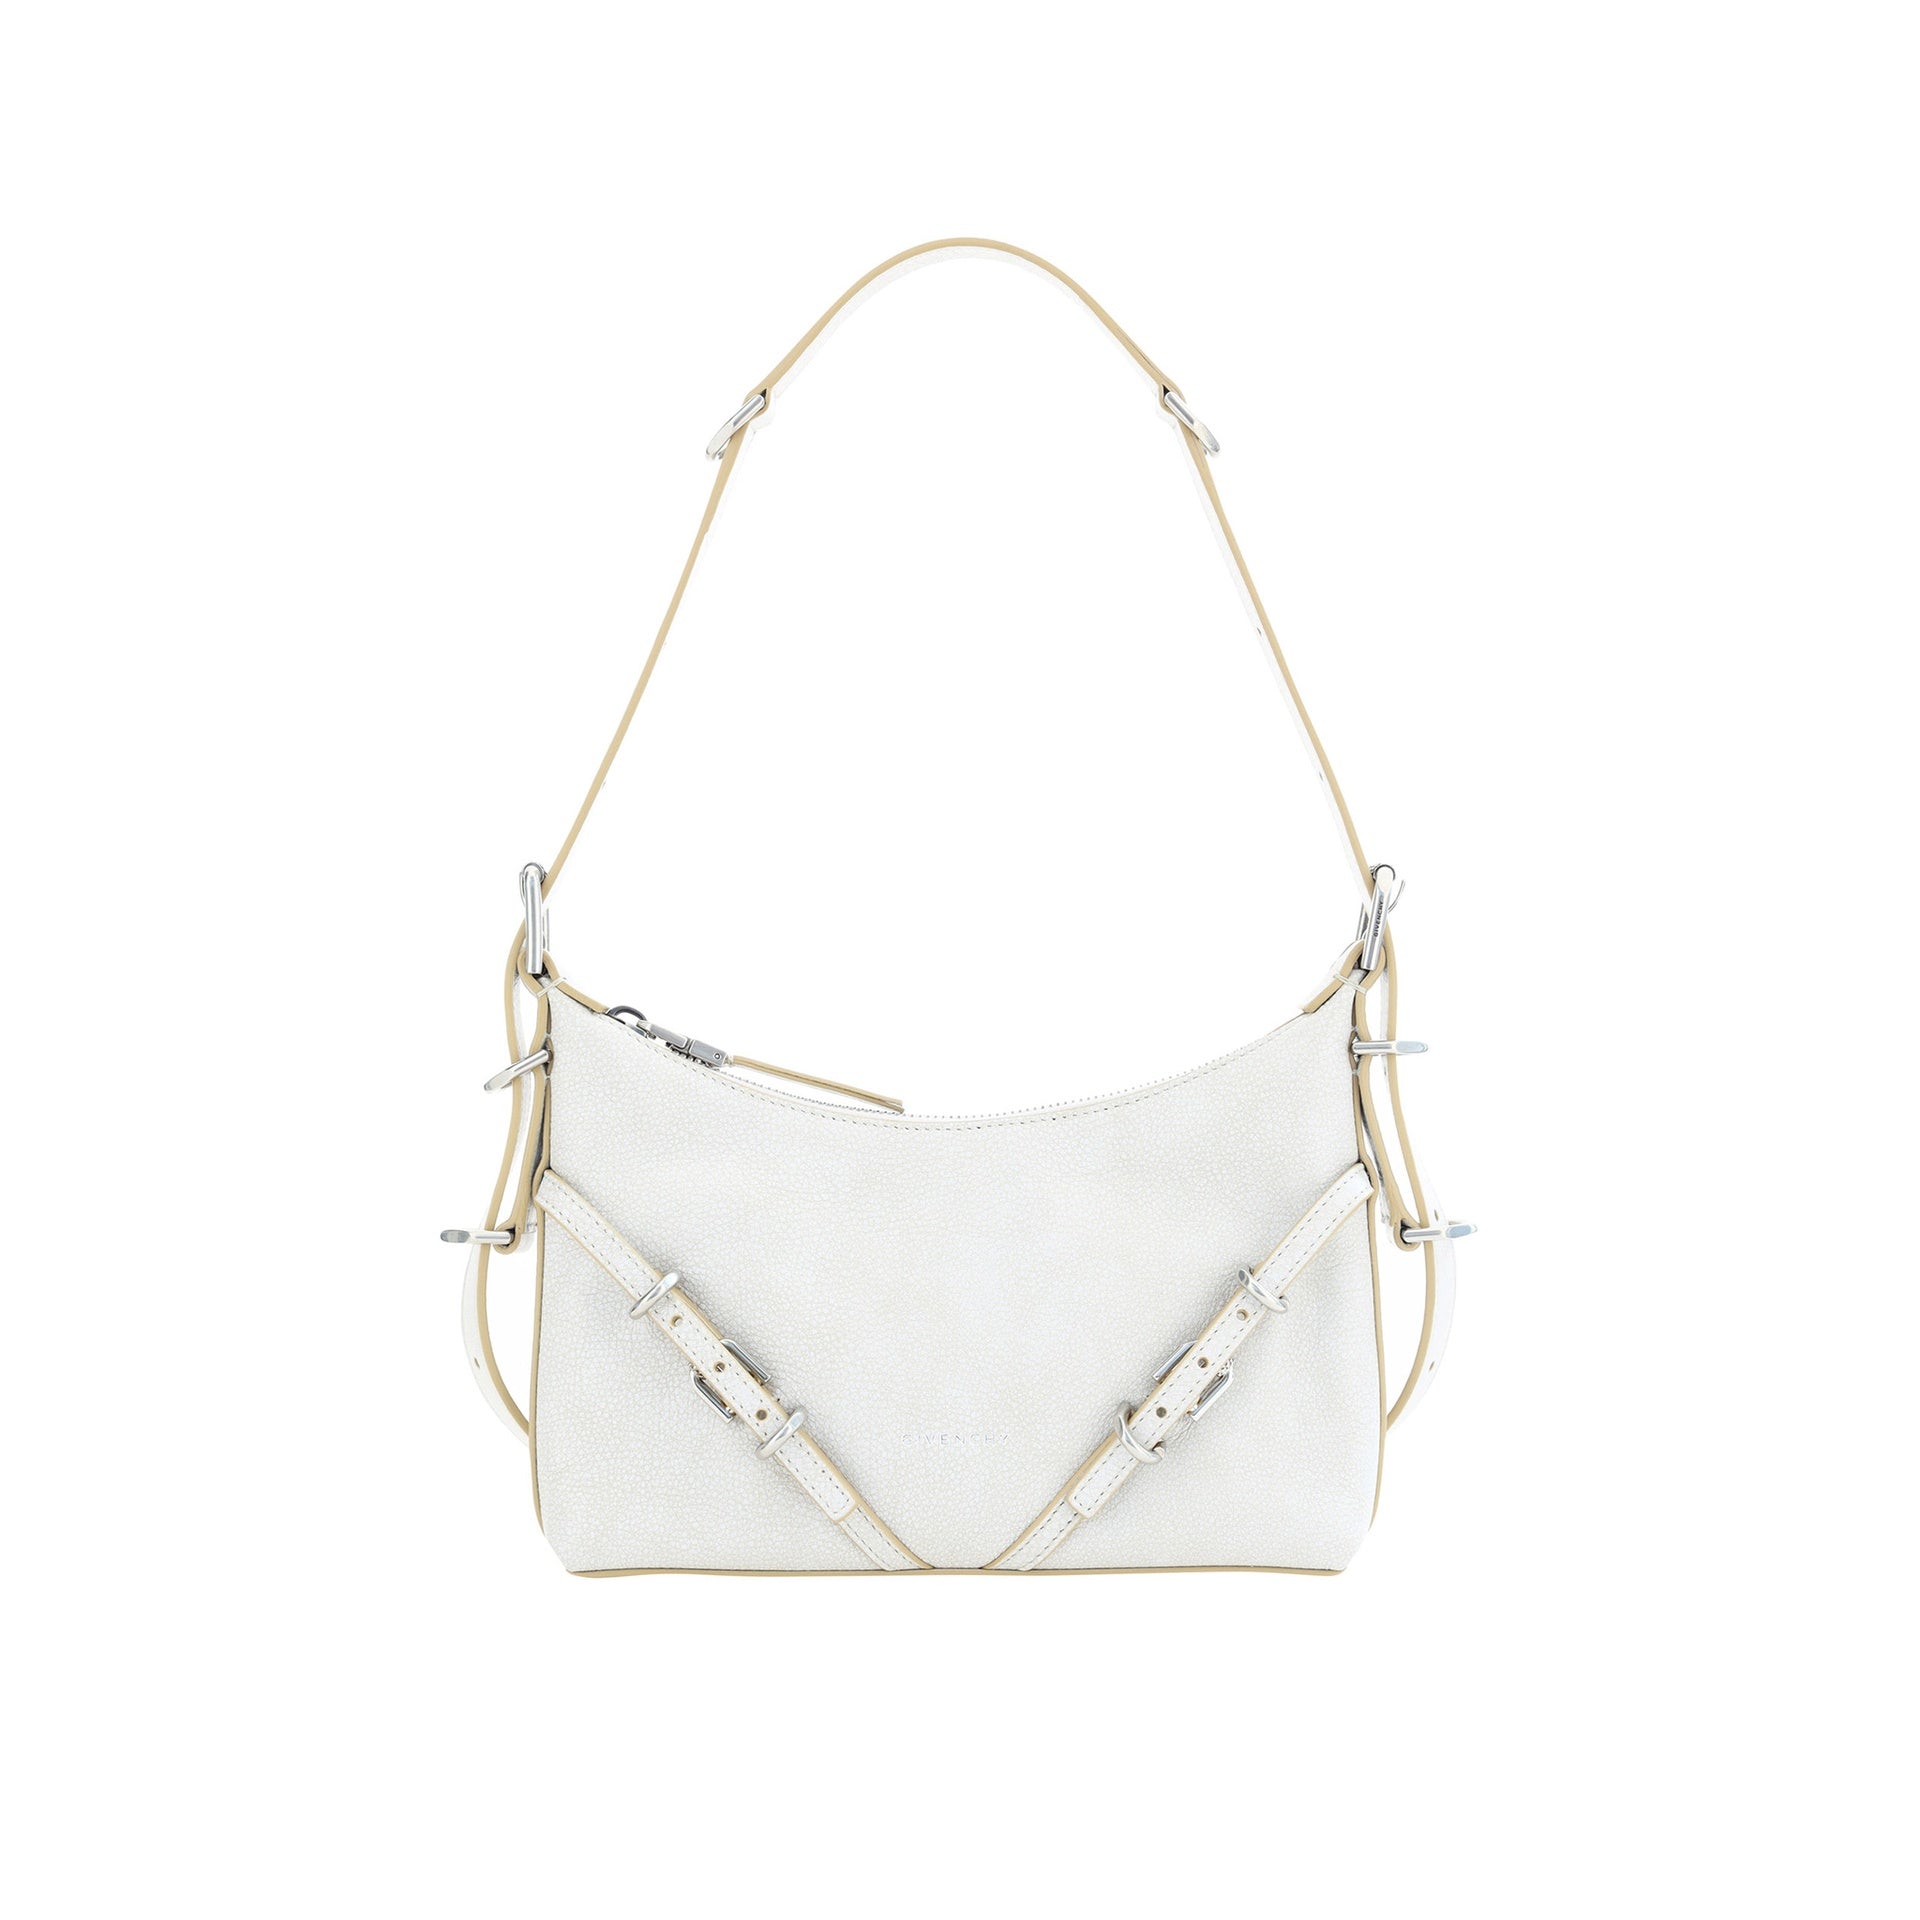 GIVENCHY-OUTLET-SALE-Versace-Voyou-Mini-Bag-Taschen-WHITE-UNI-ARCHIVE-COLLECTION.jpg